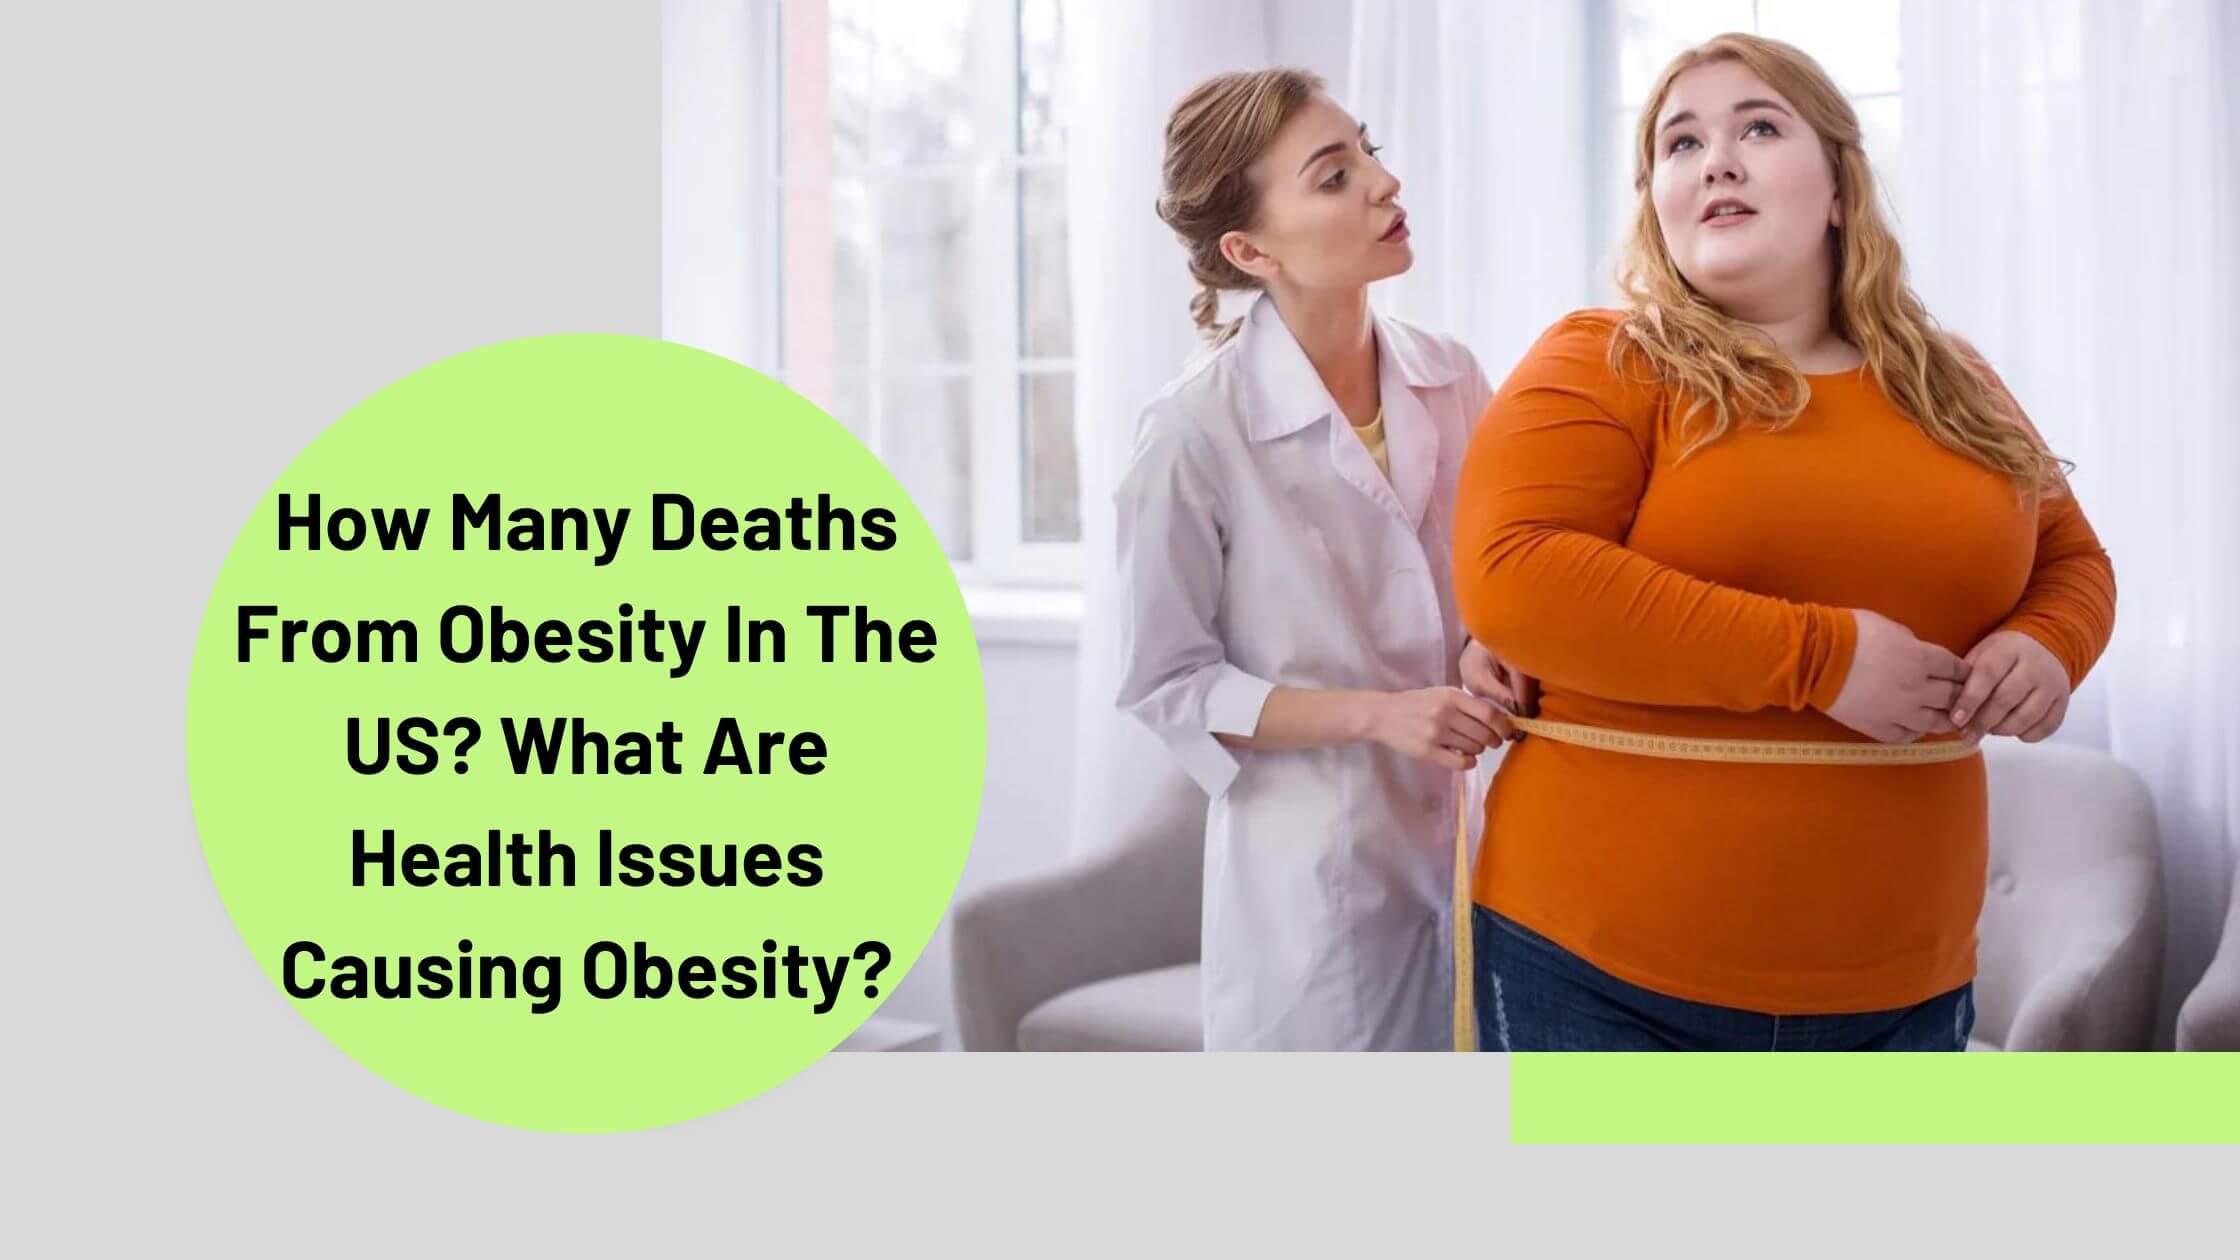 Deaths From Obesity In The US